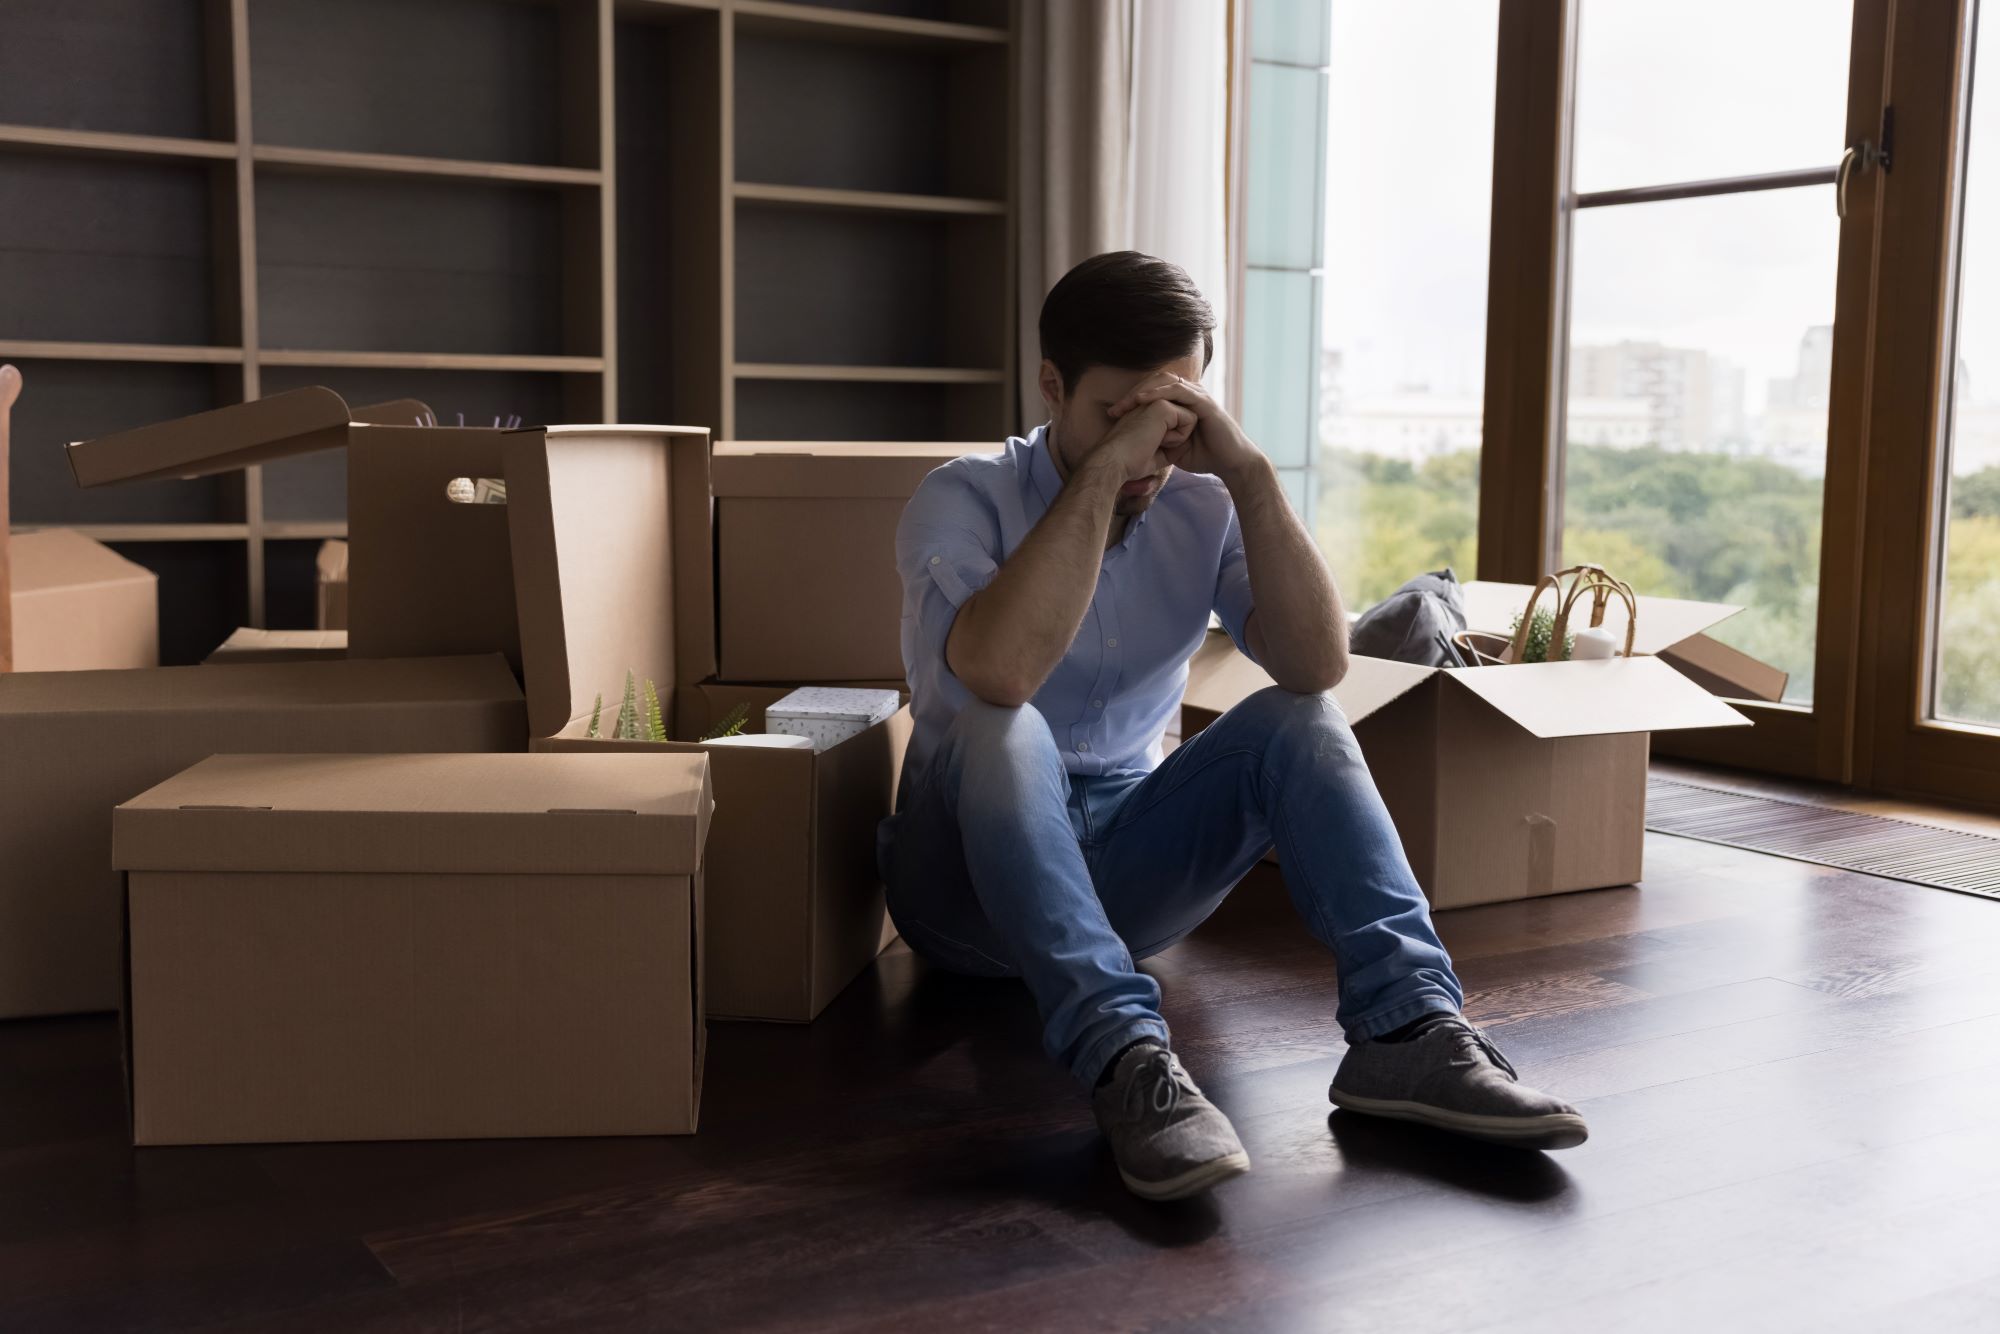 Sad man sitting on floor surrounded by boxes.